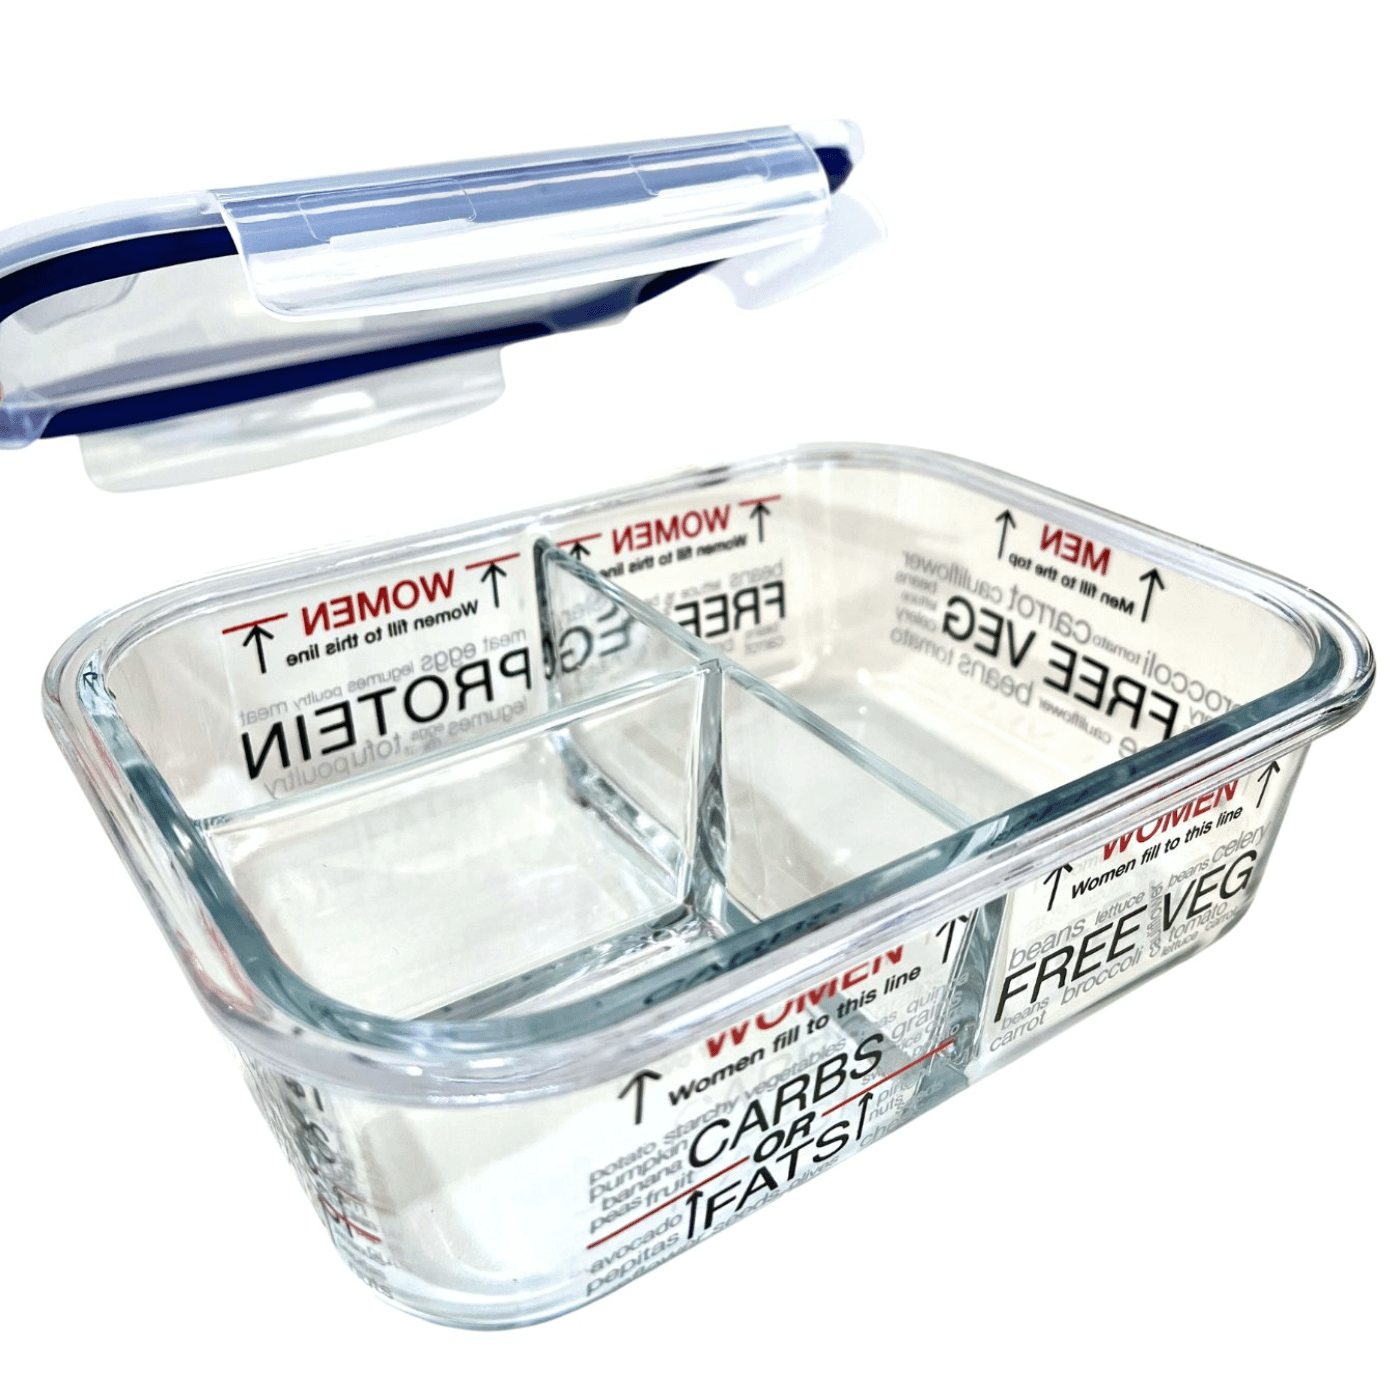 Portion Perfection Bariatric kit-n-karry Lunch Bag